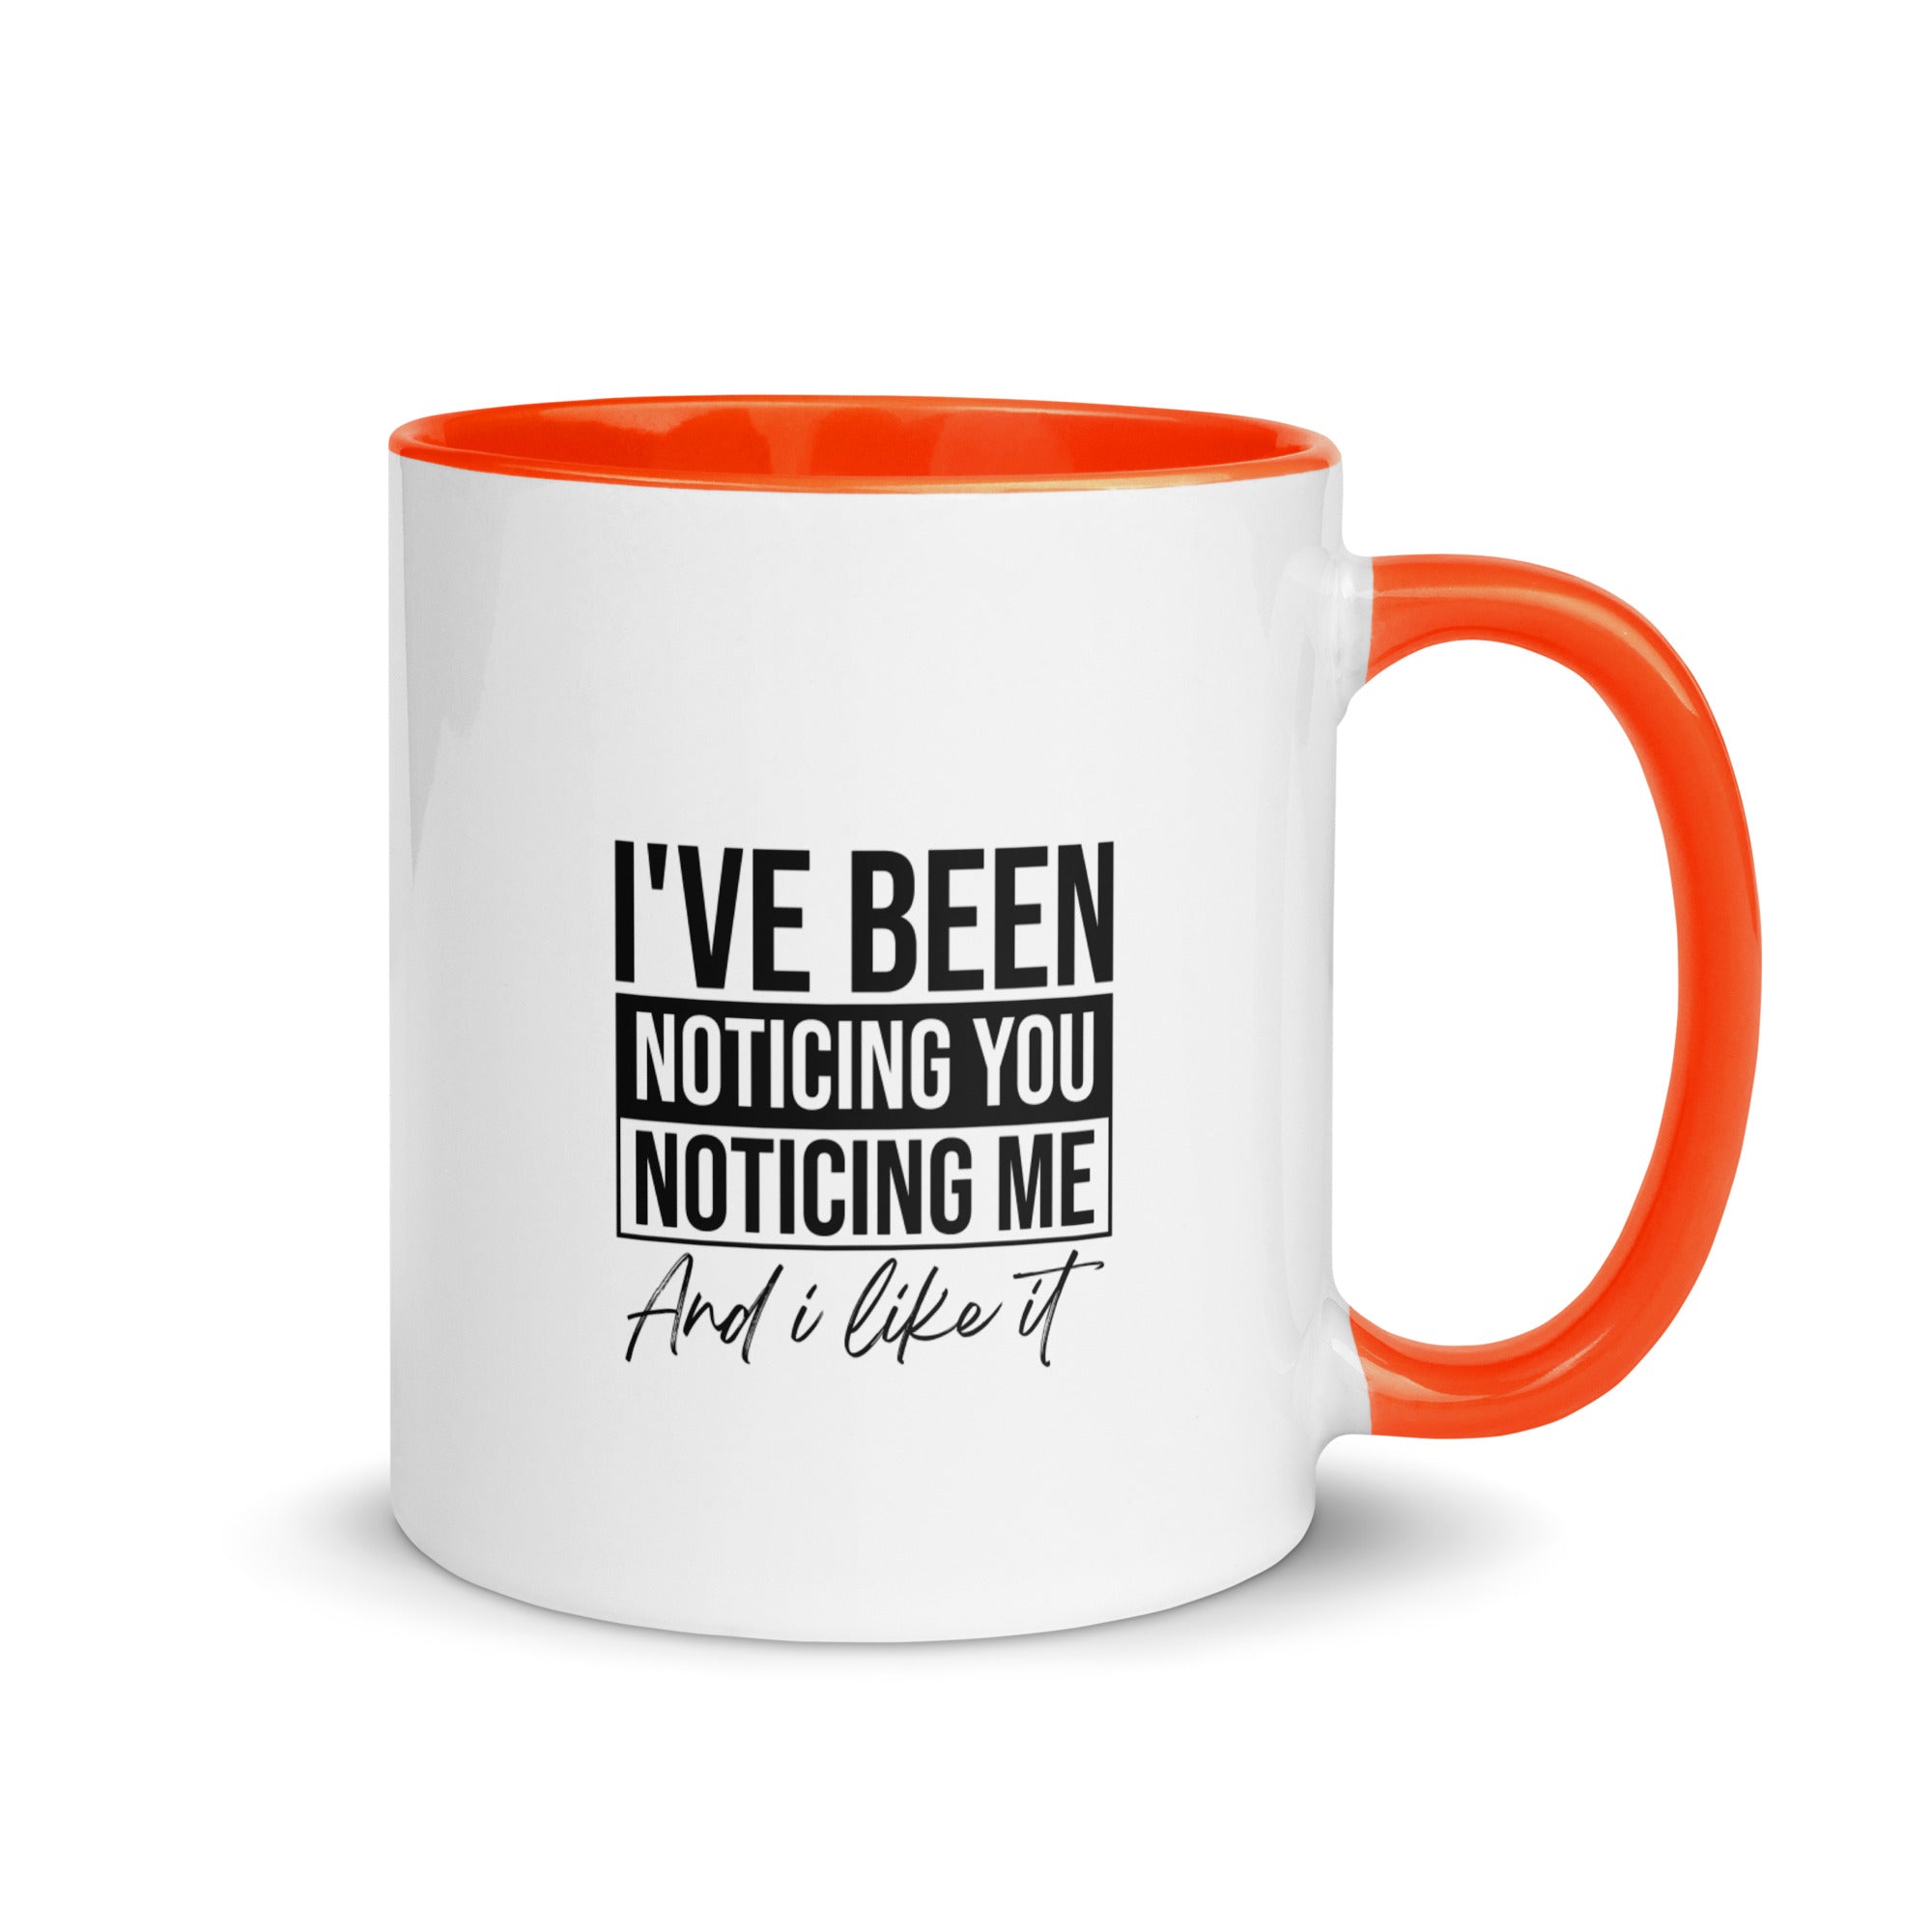 Mug with Color Inside | I've been noticing you noticing me and I like it